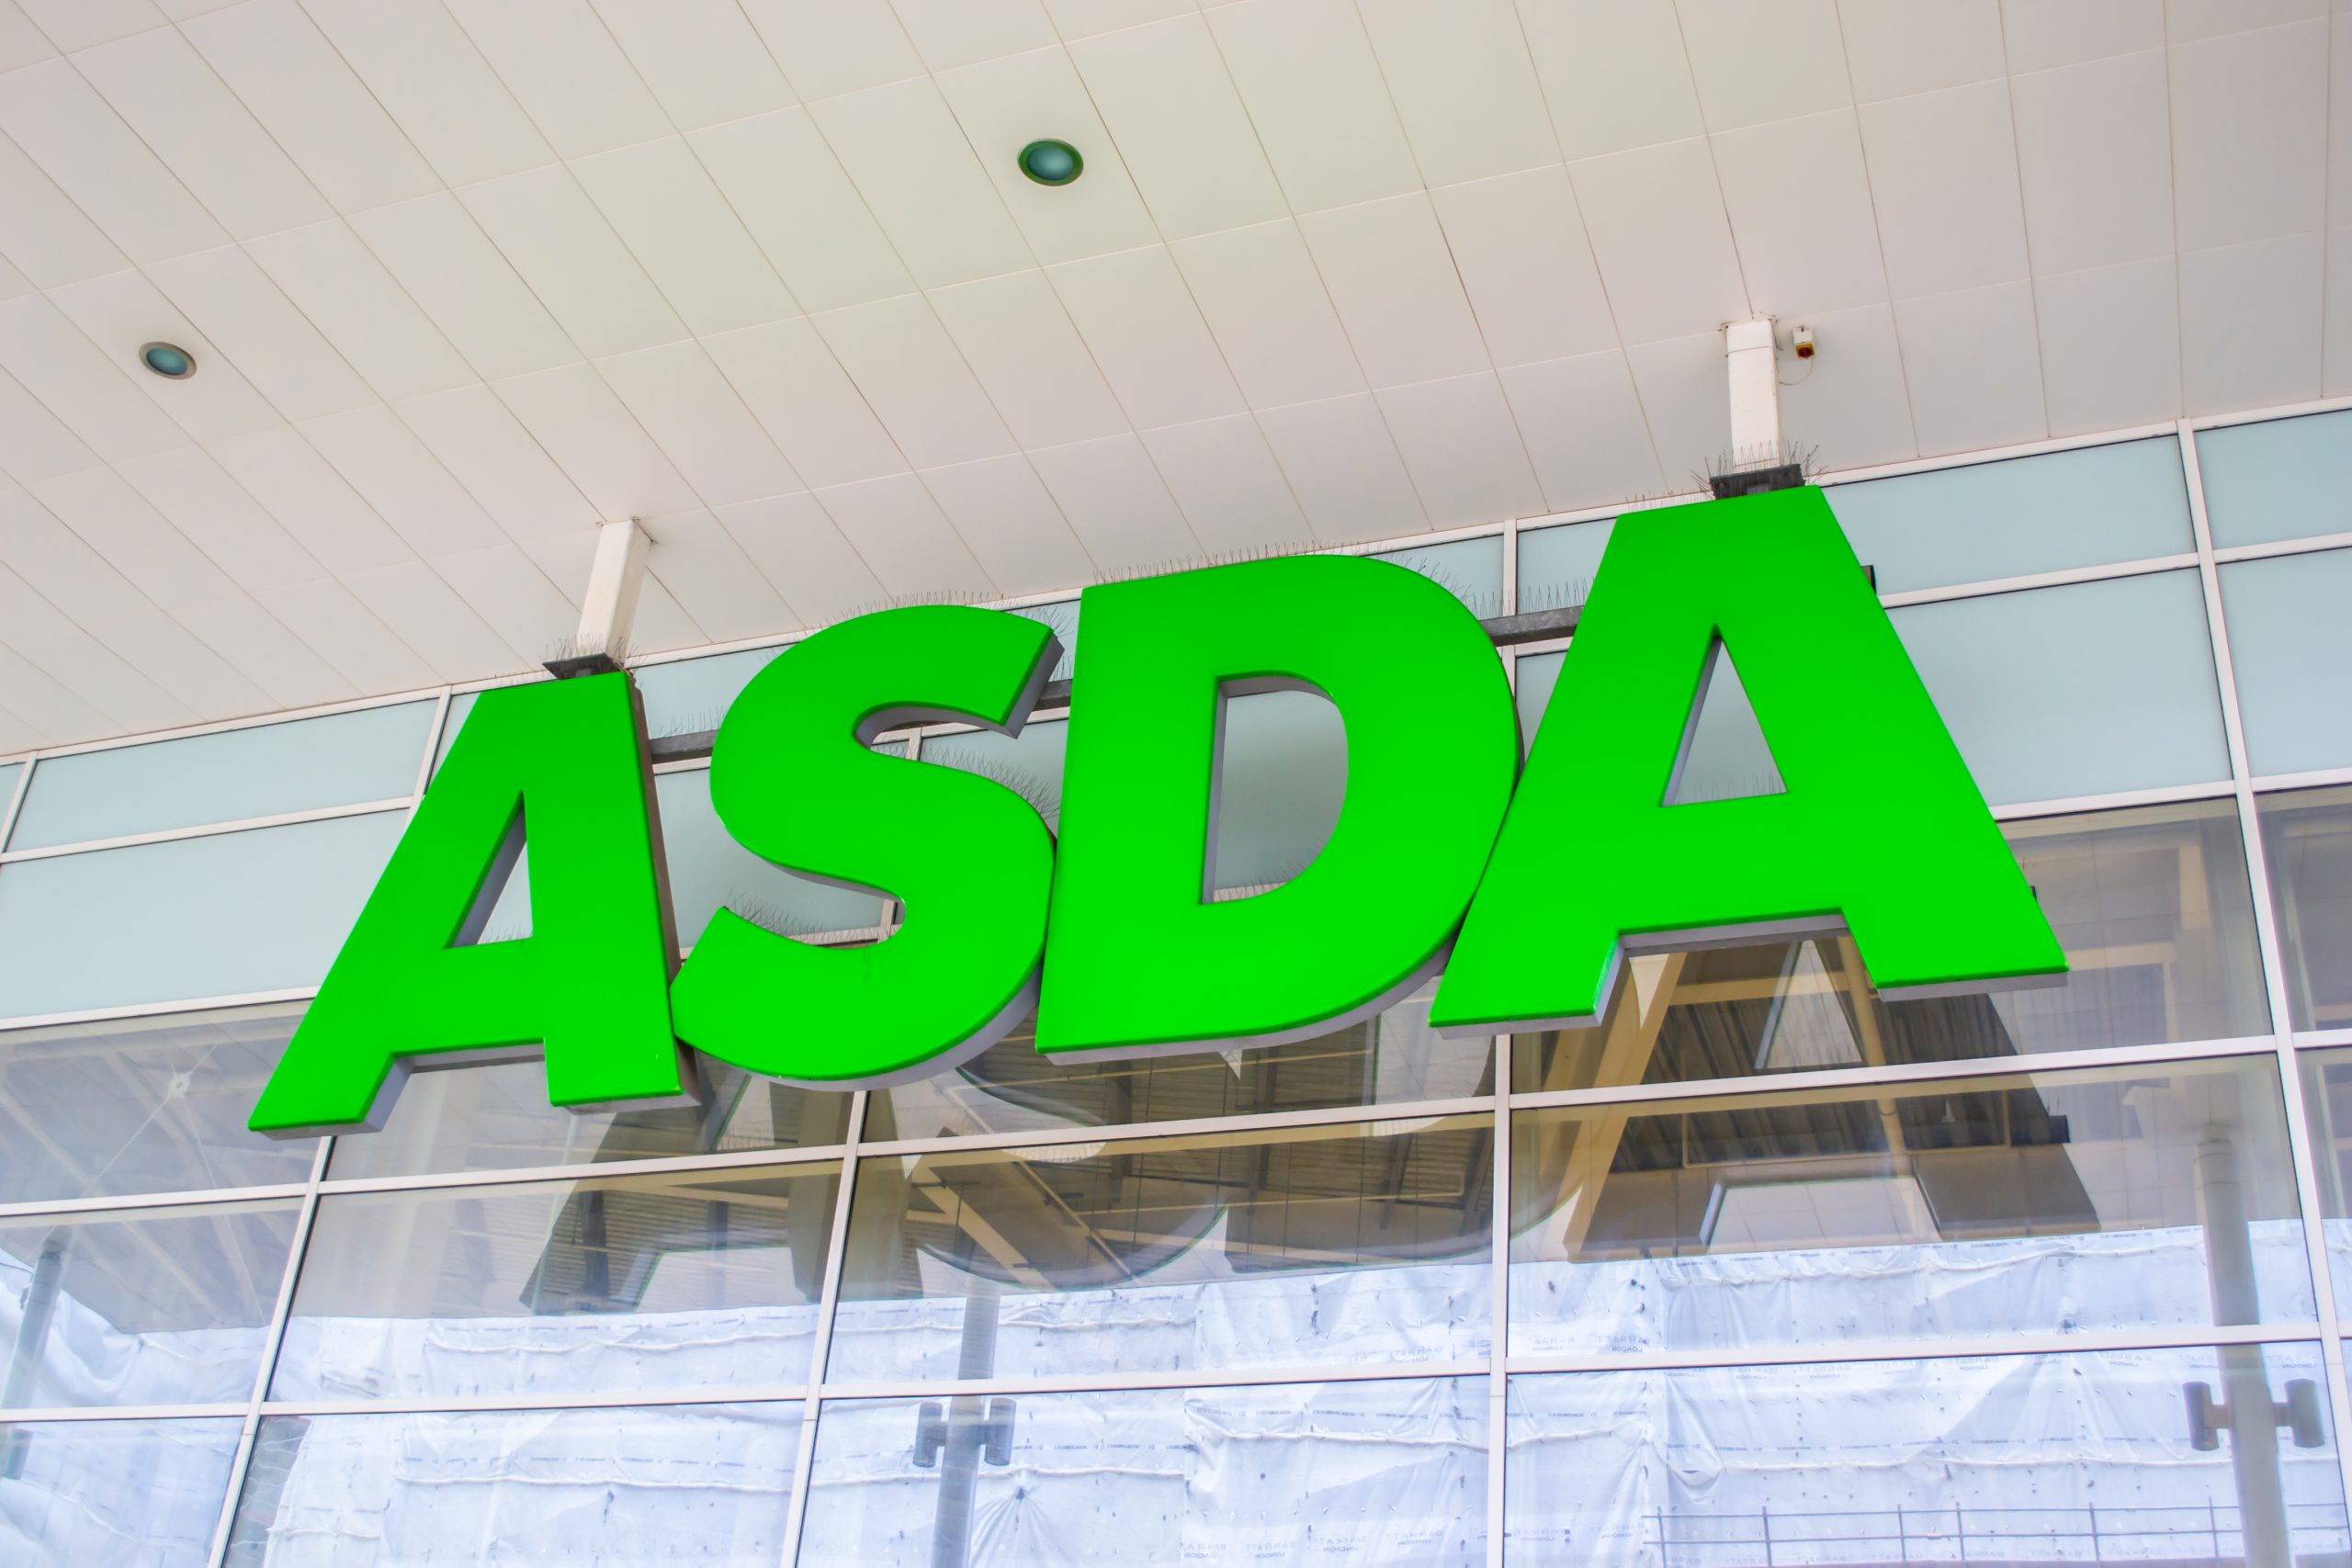 Asda vows to be ‘consumer champion’ after EG Group deal